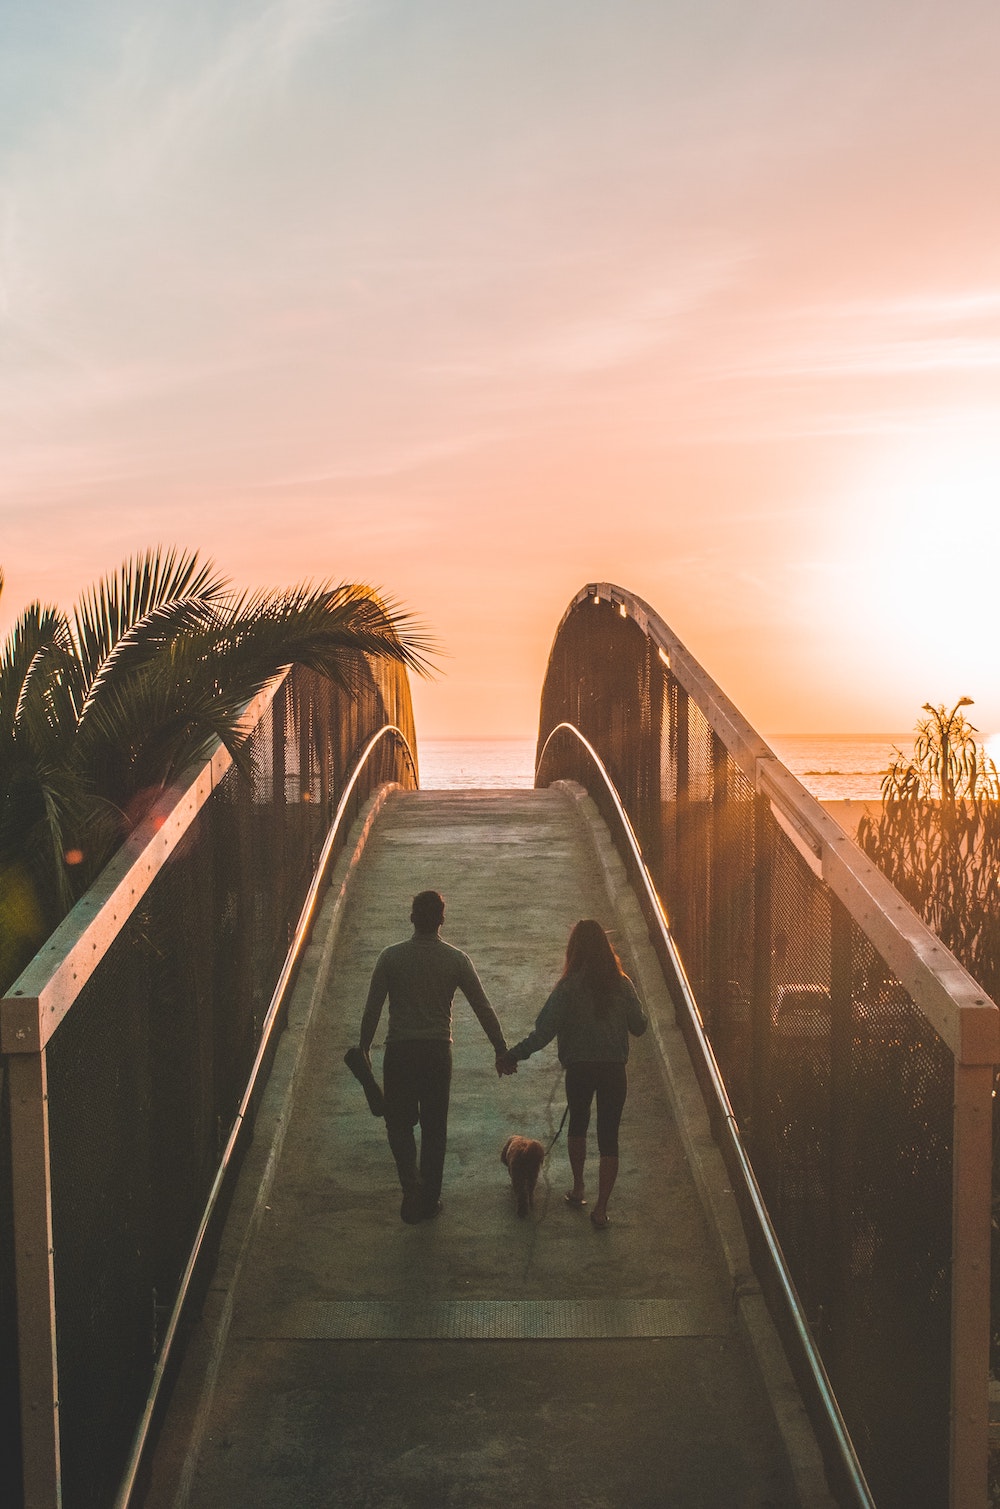 A man and a woman are holding hands and walking a dog. They are crossing a bridge toward the sunset and the sky is pink.